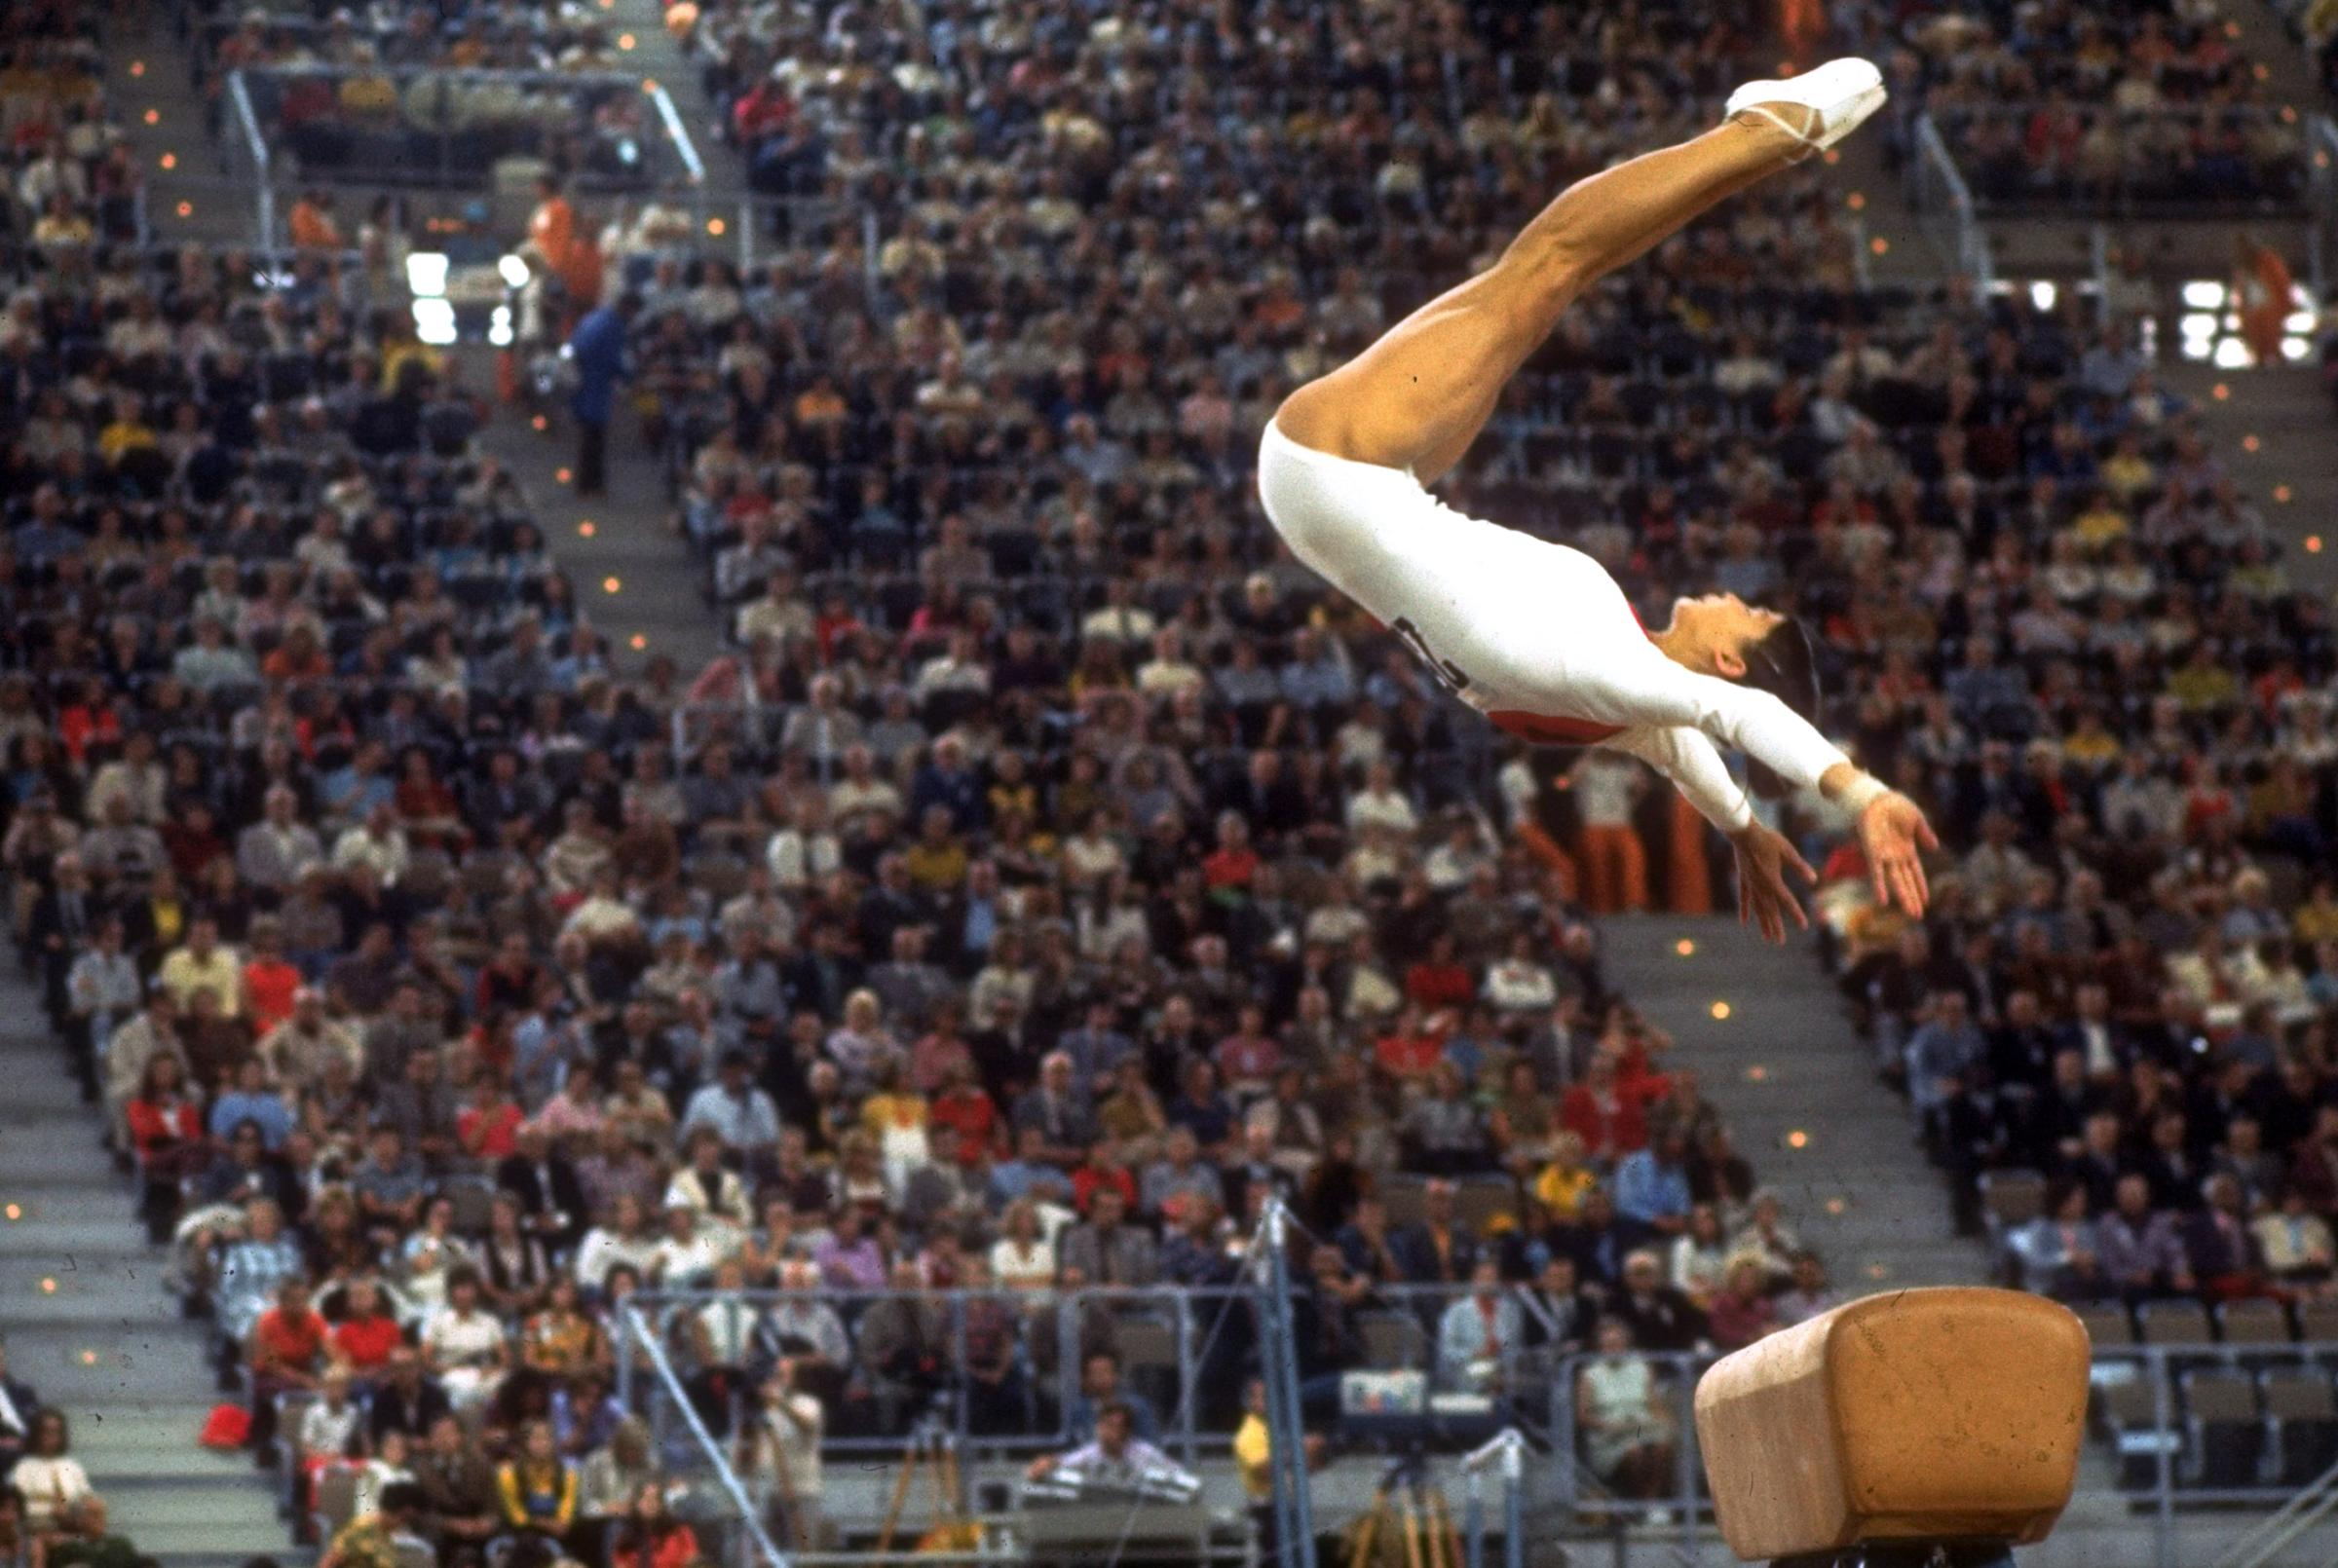 U.S. gymnast Ludmila Turishcheva in action on the vault at during the 1972 Summer Olympics in Munich, West Germany.